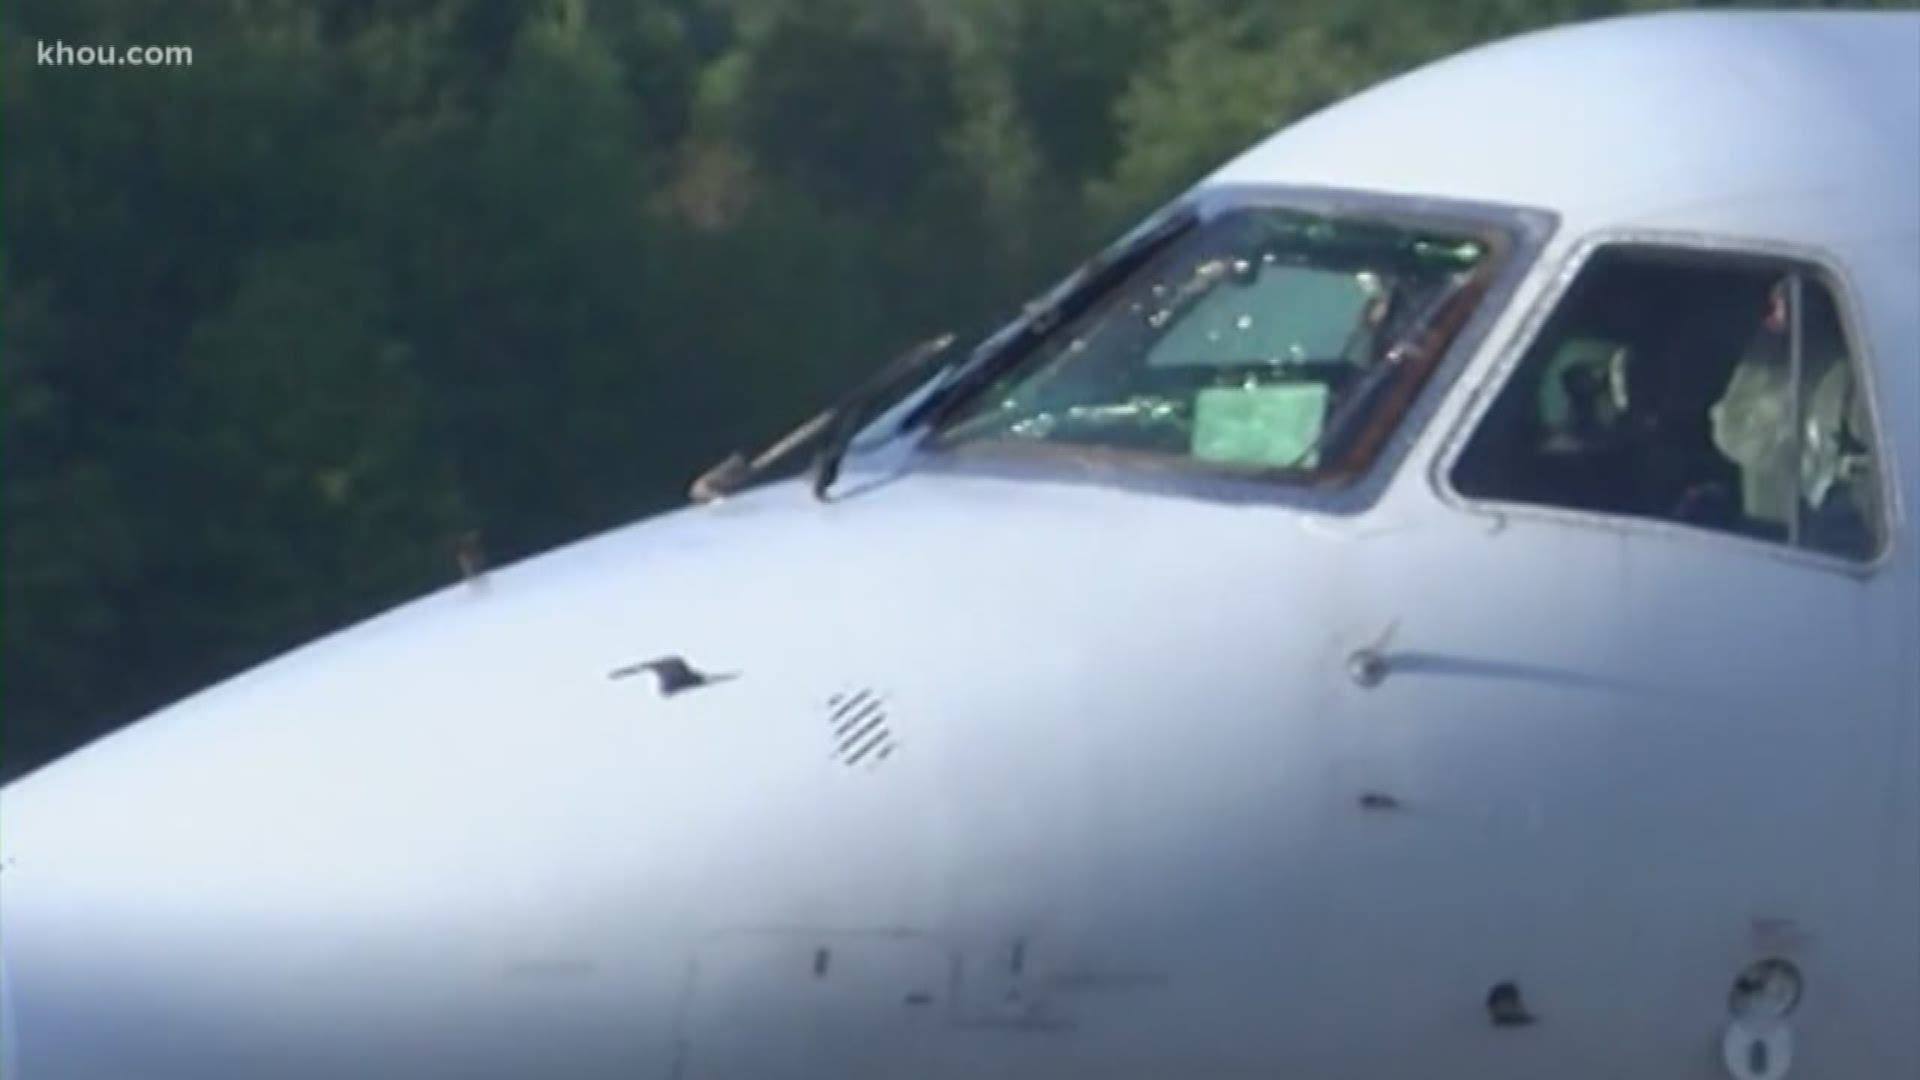 The windshield of a plane, chartered to fly workers to the Texas oil fields near Midland, shattered mid-flight Tuesday, a spokesperson for the Baton Rouge Airport confirmed.